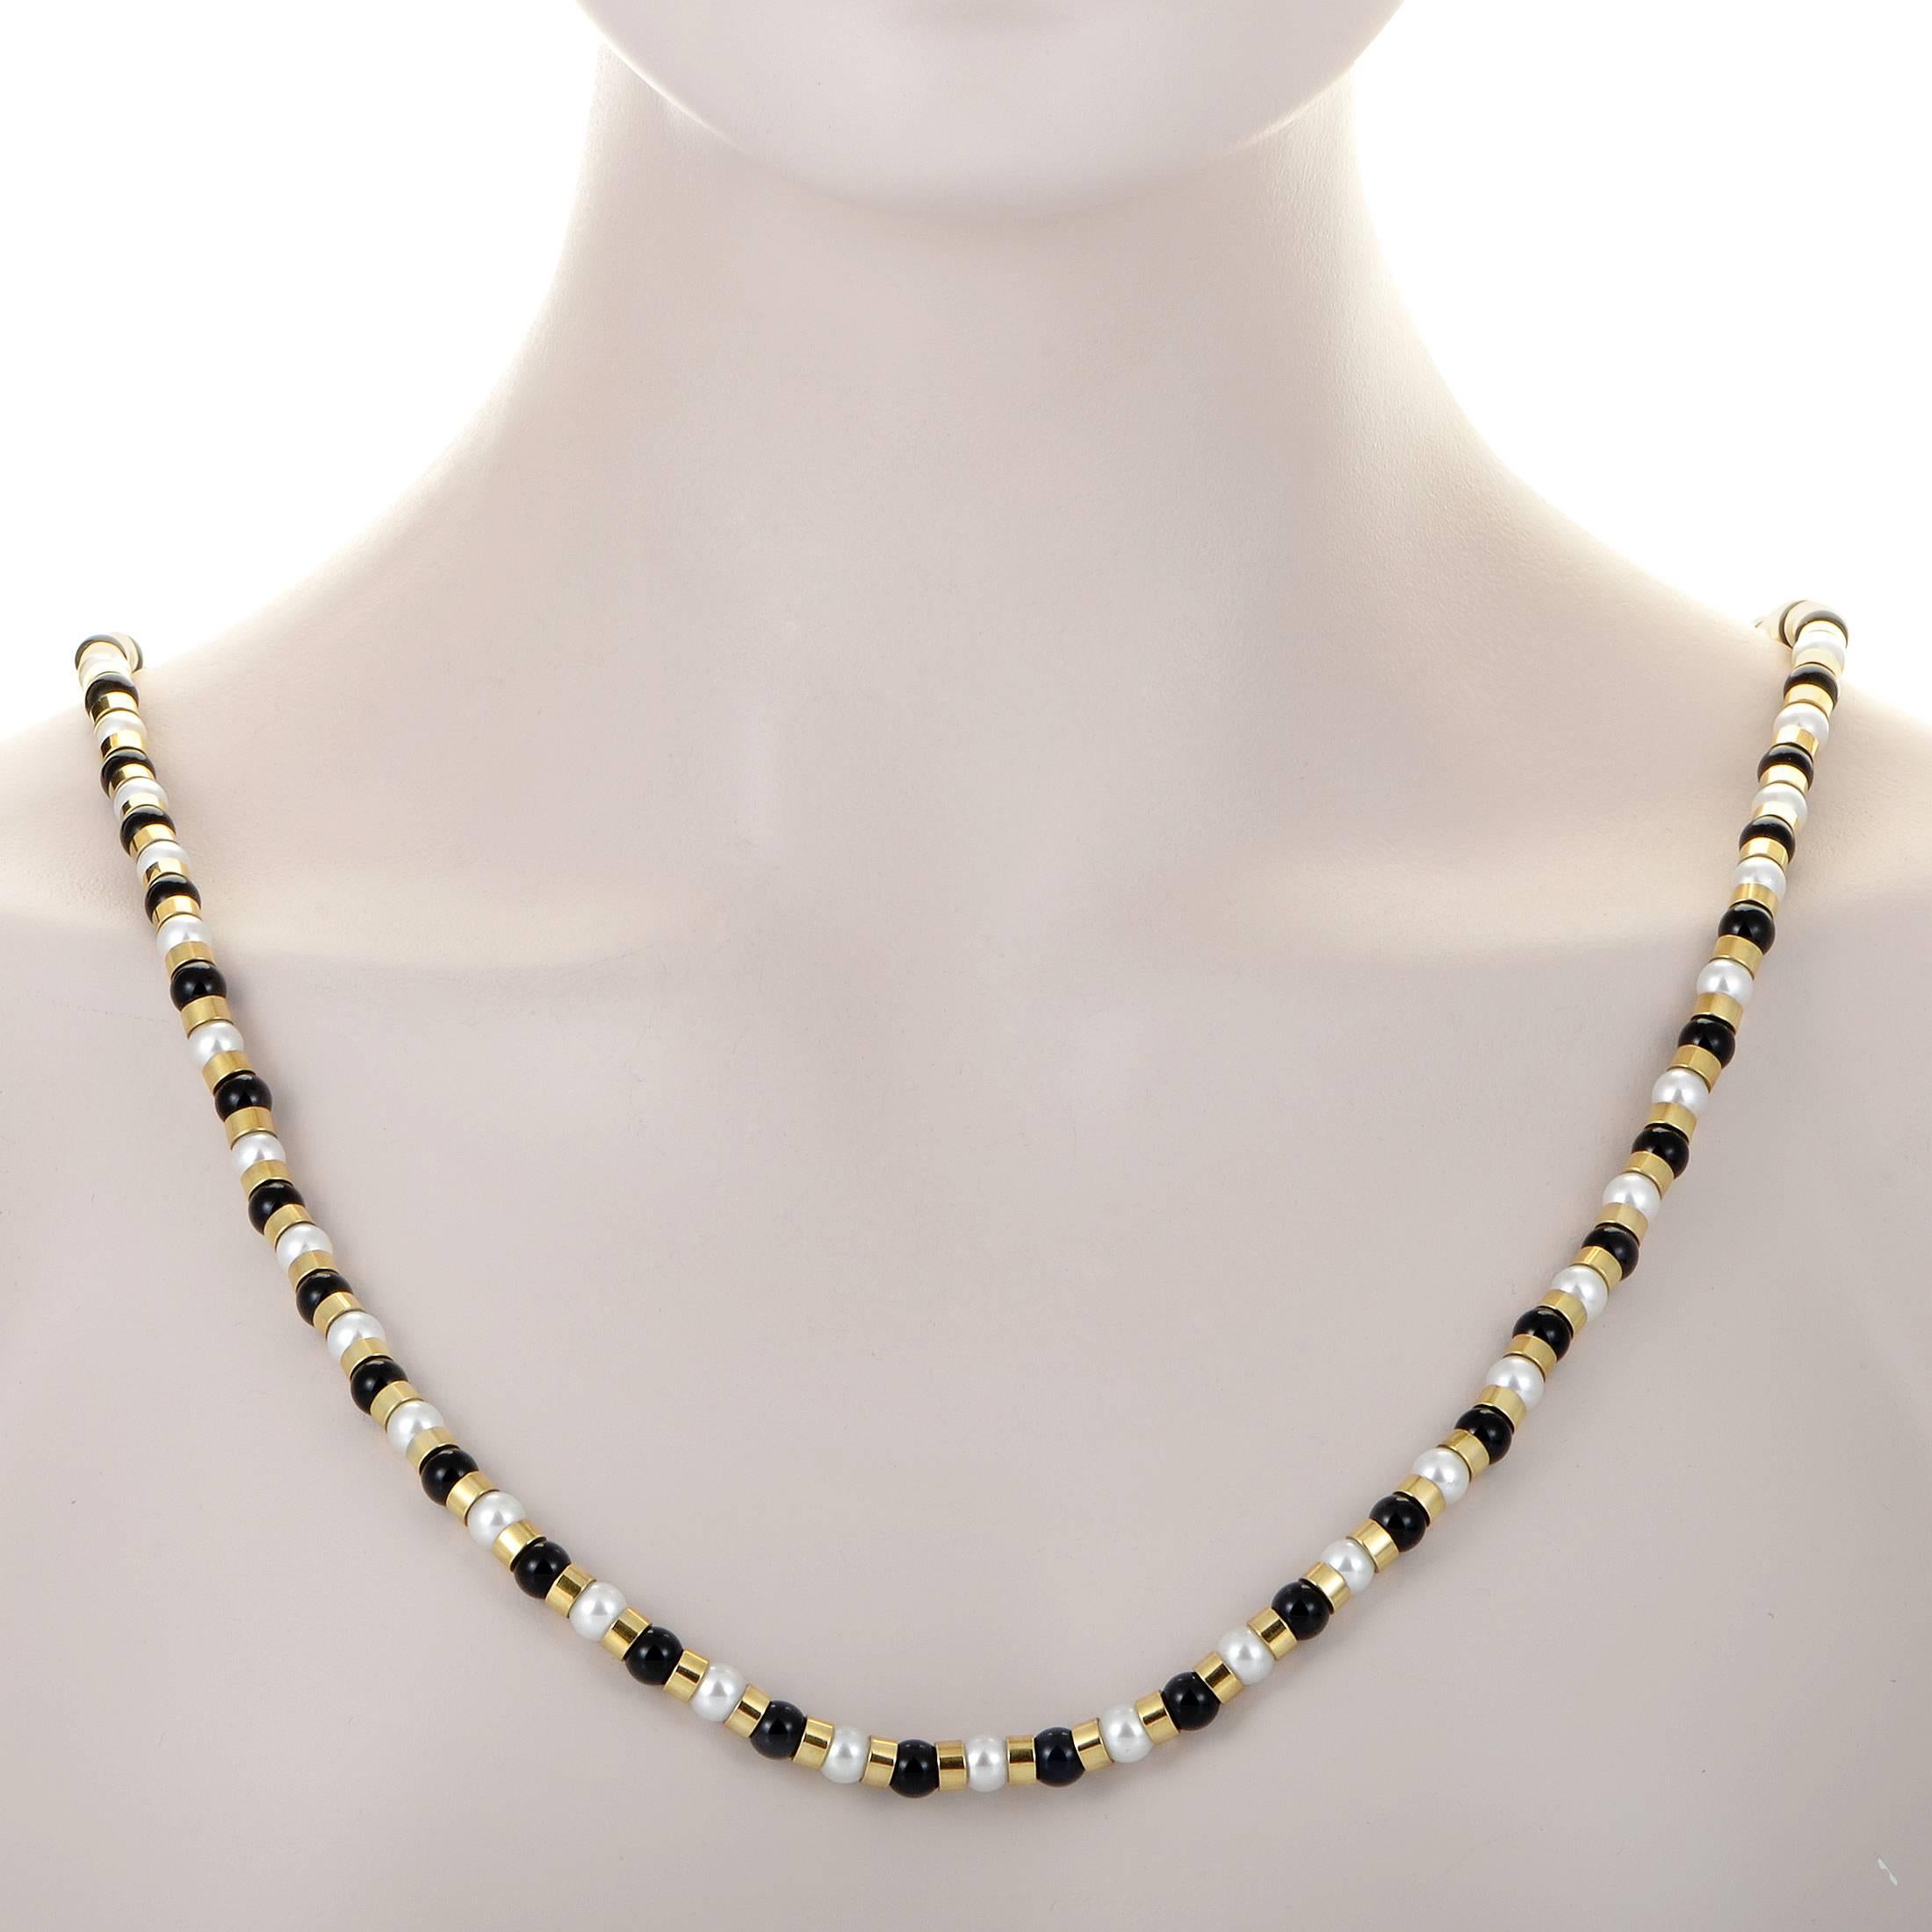 In a stunningly elegant design, eye-catching effect is produced through tastefully contrasting blend of splendid pearls and striking onyx stones interspersed with radiant 18K yellow gold in this exceptional necklace from Chanel.
Included Items: